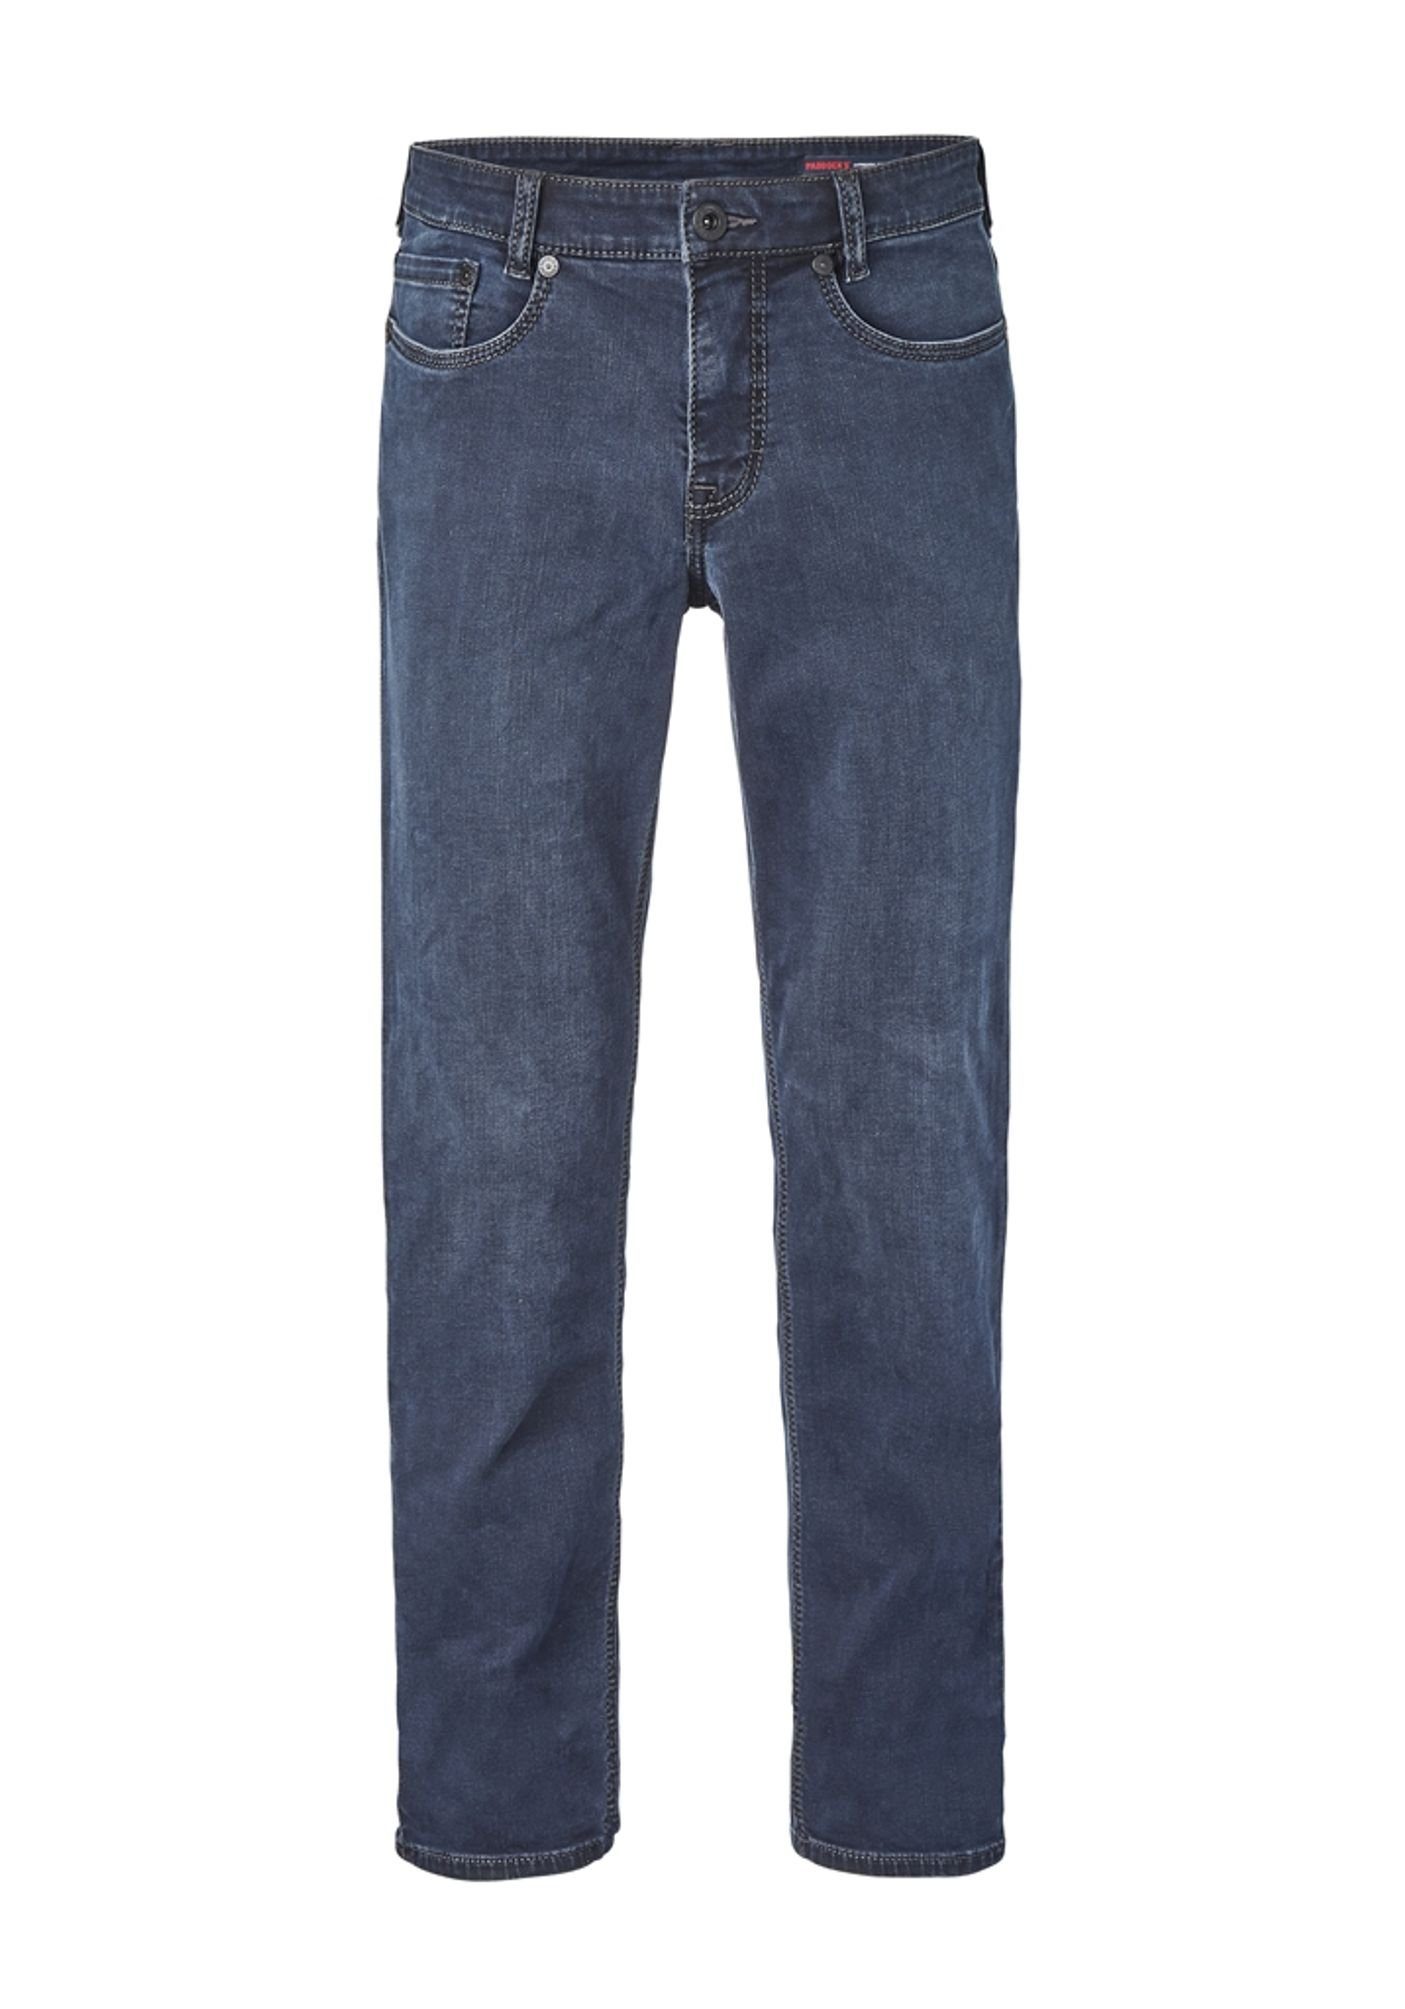 Redpoint Pipe Paddock's (801996329000) 5-Pocket-Jeans